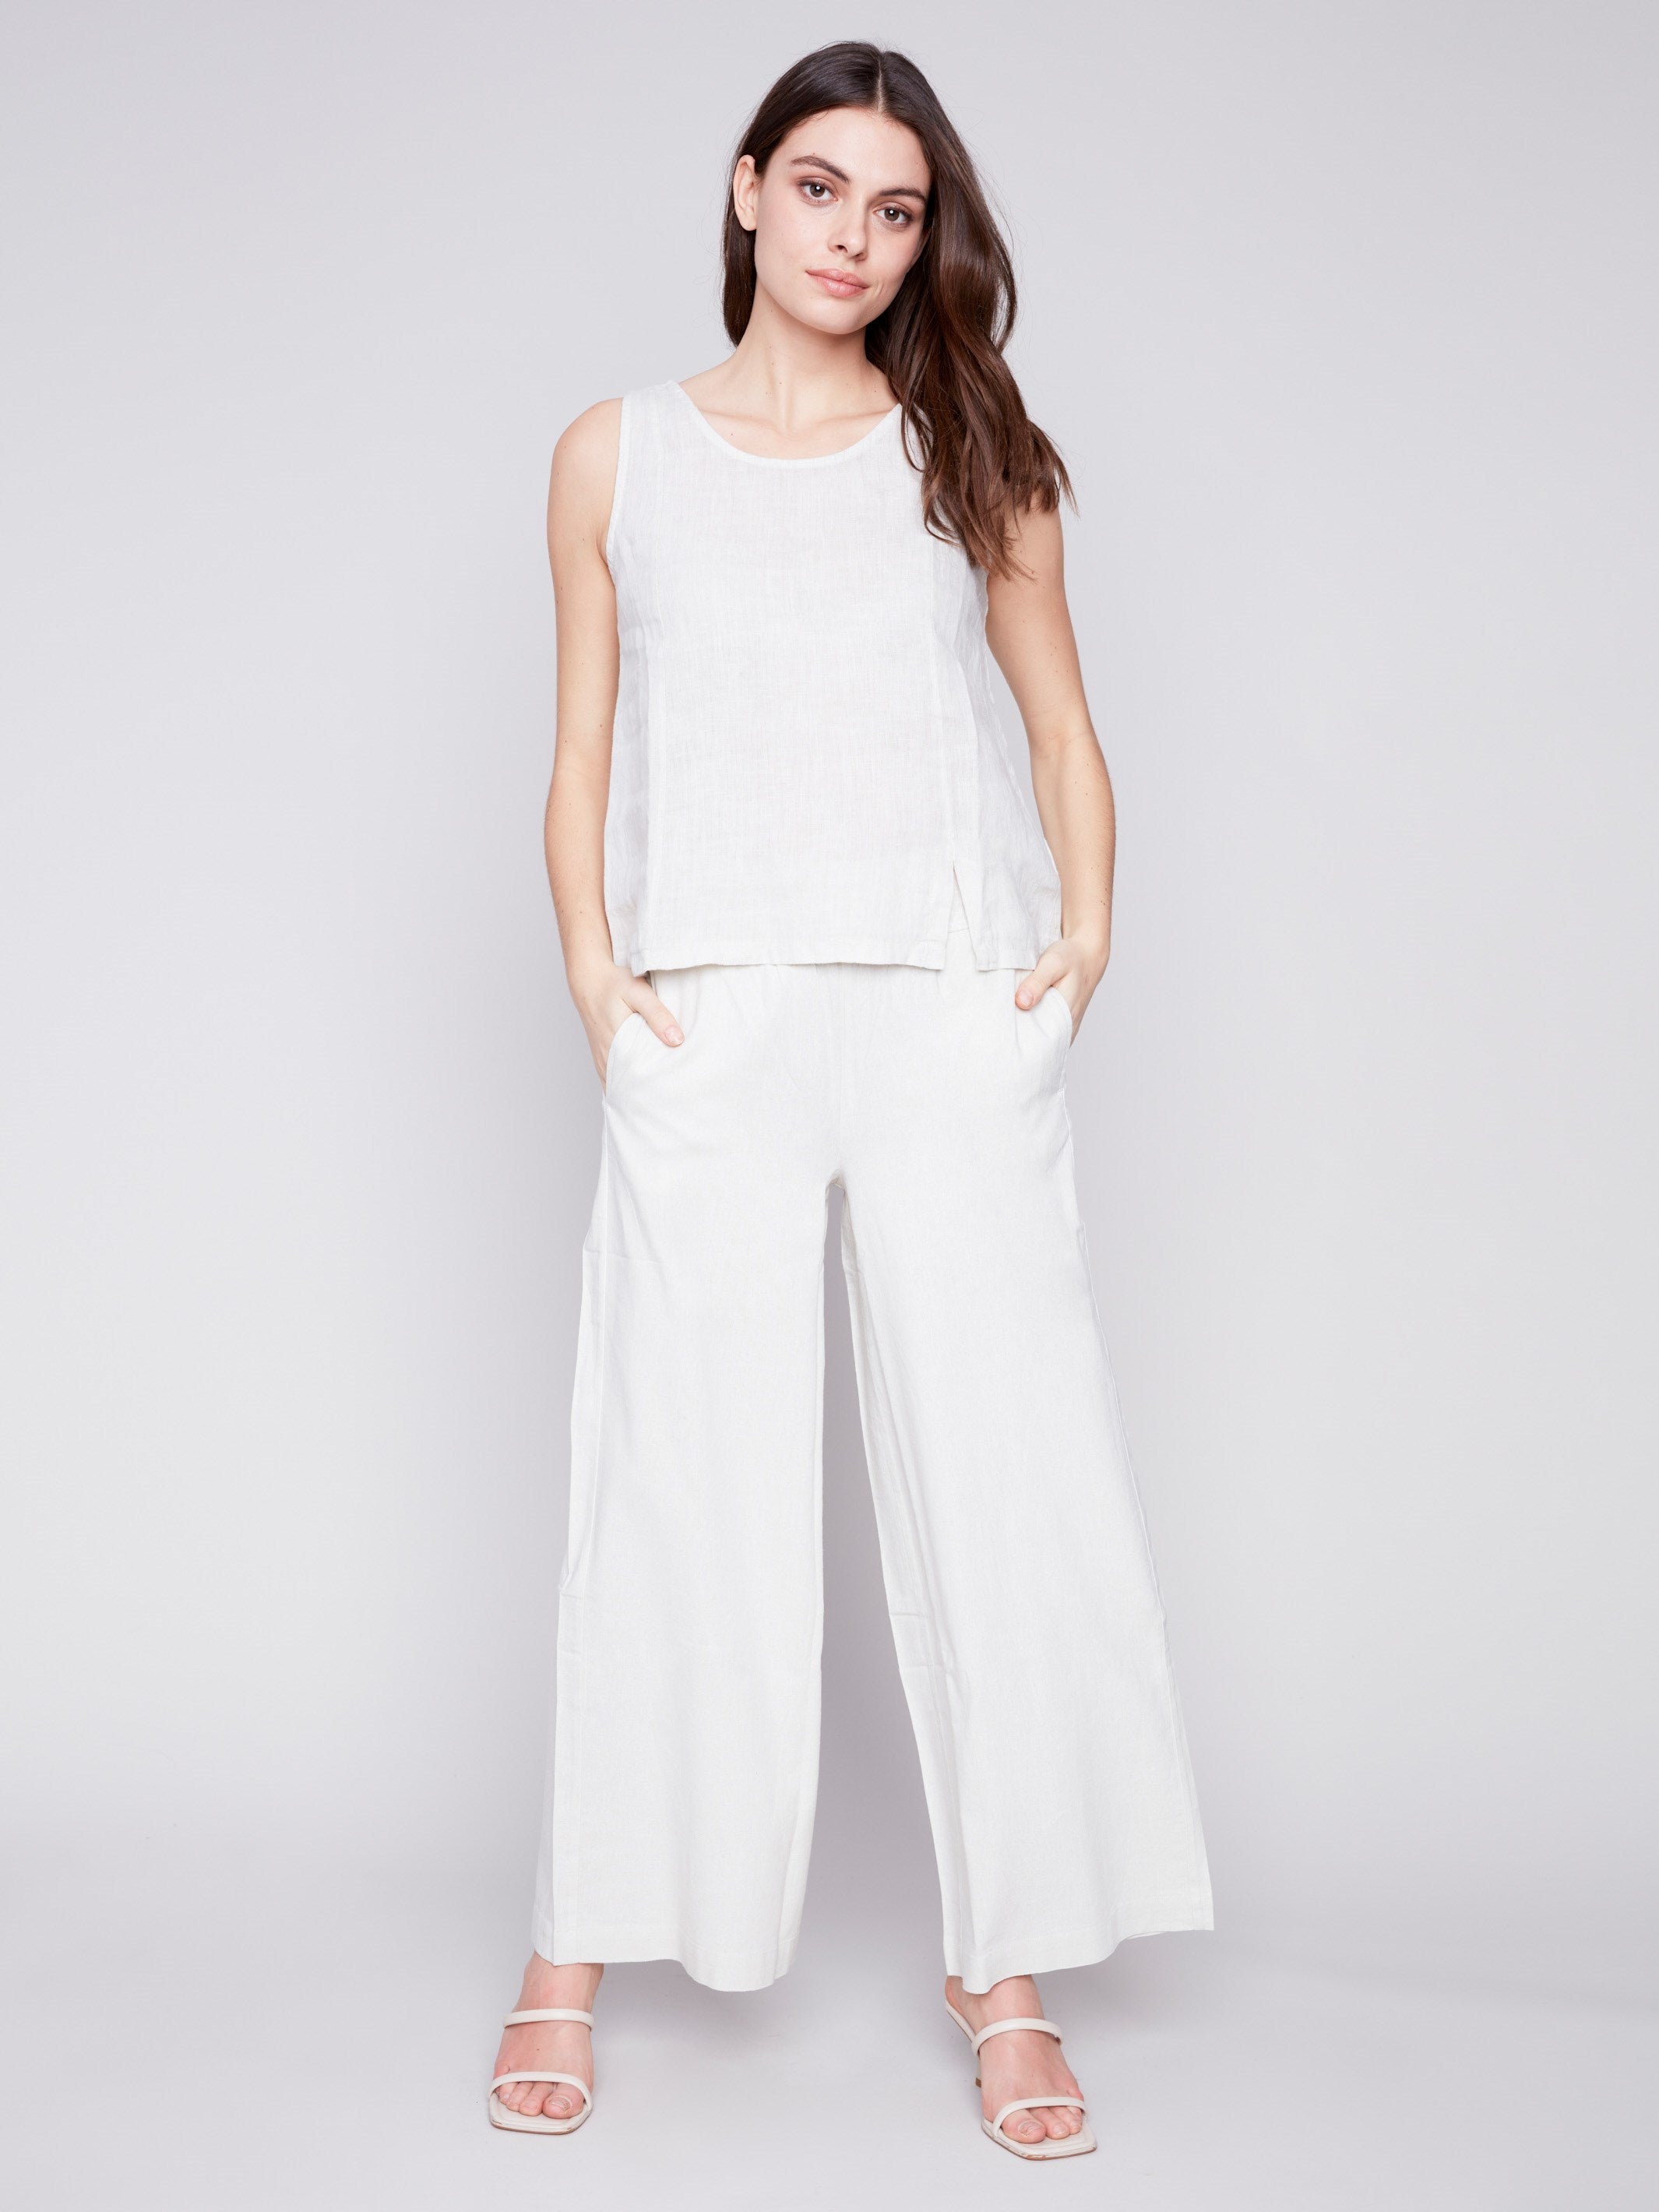 Sleeveless Linen Top with Slit - Natural - Charlie B Collection Canada - Image 2